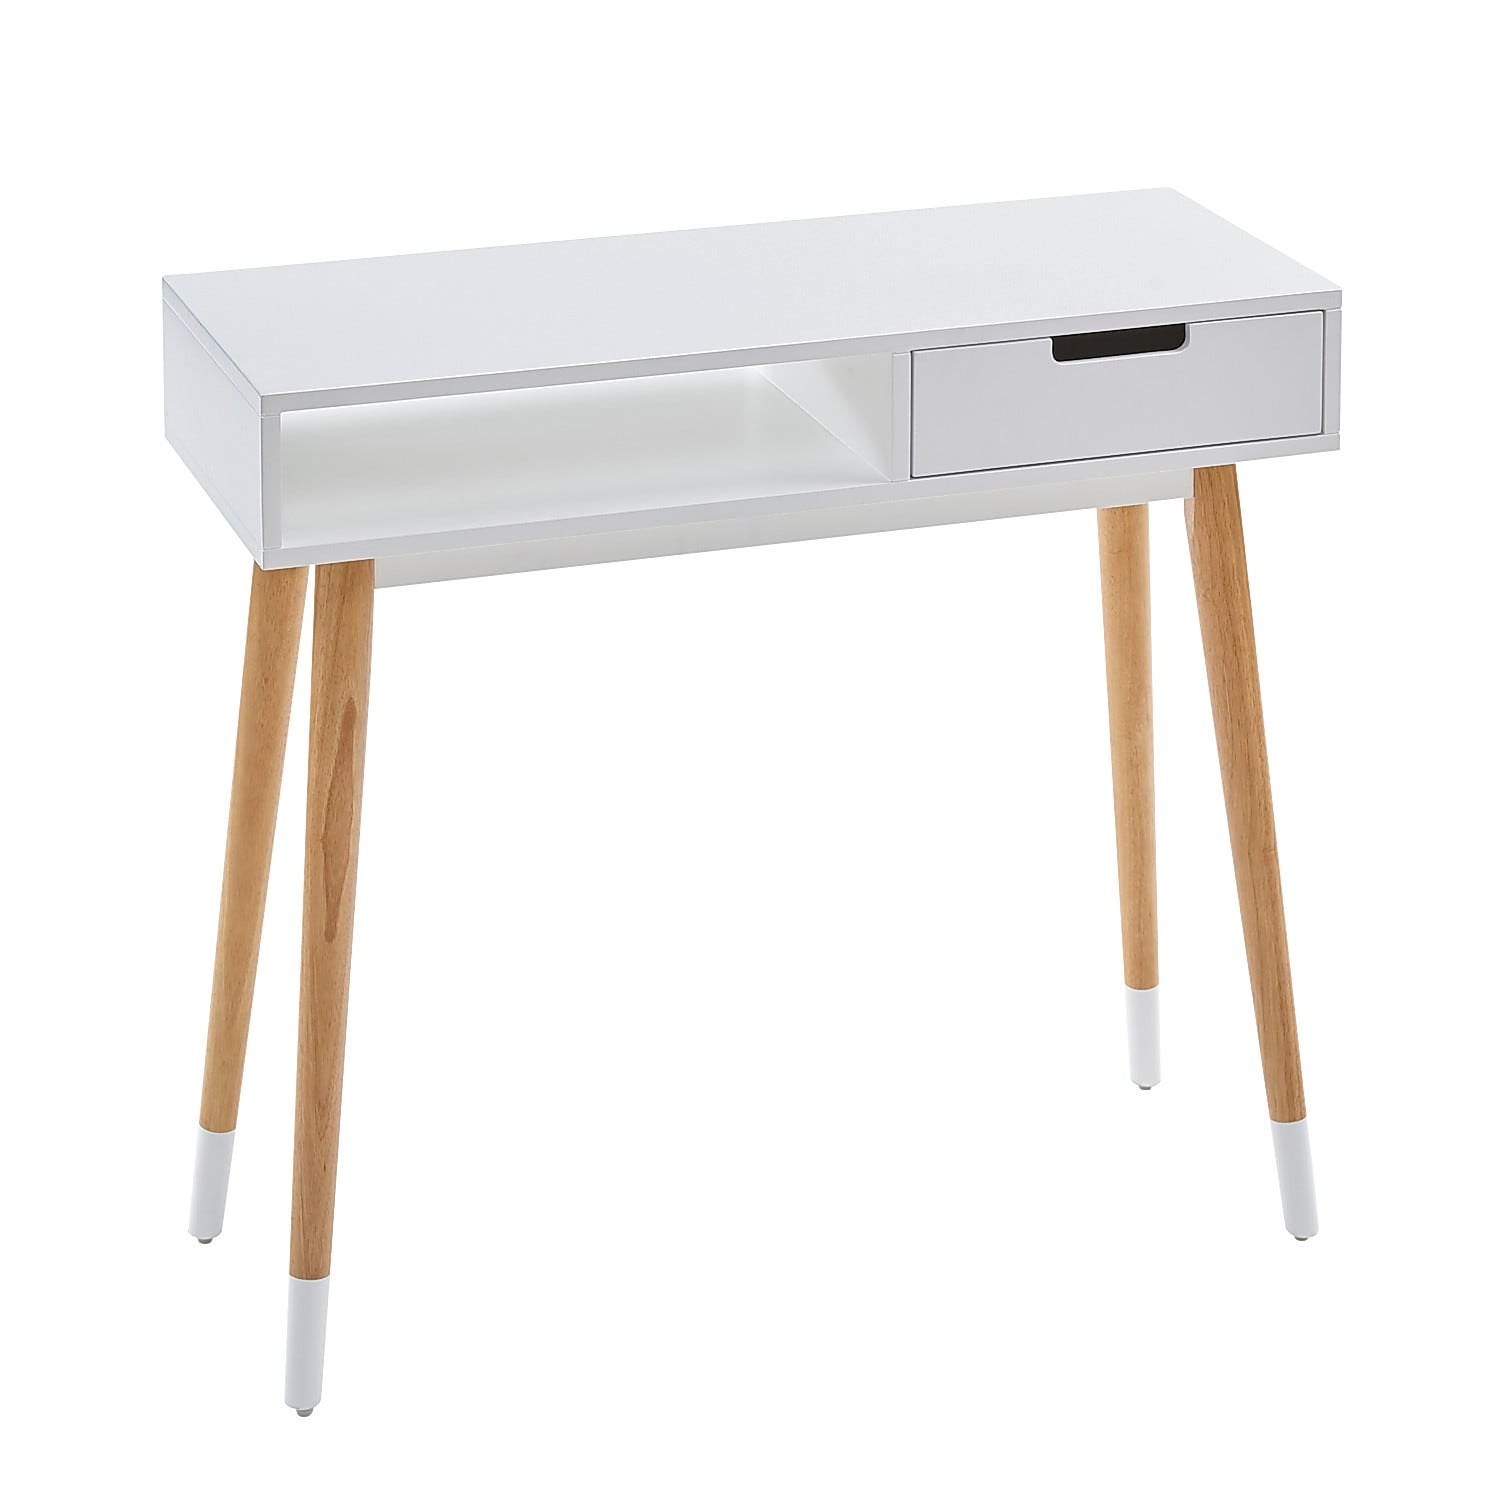 Saturn White Console Table Small Space Cramping Your Style This